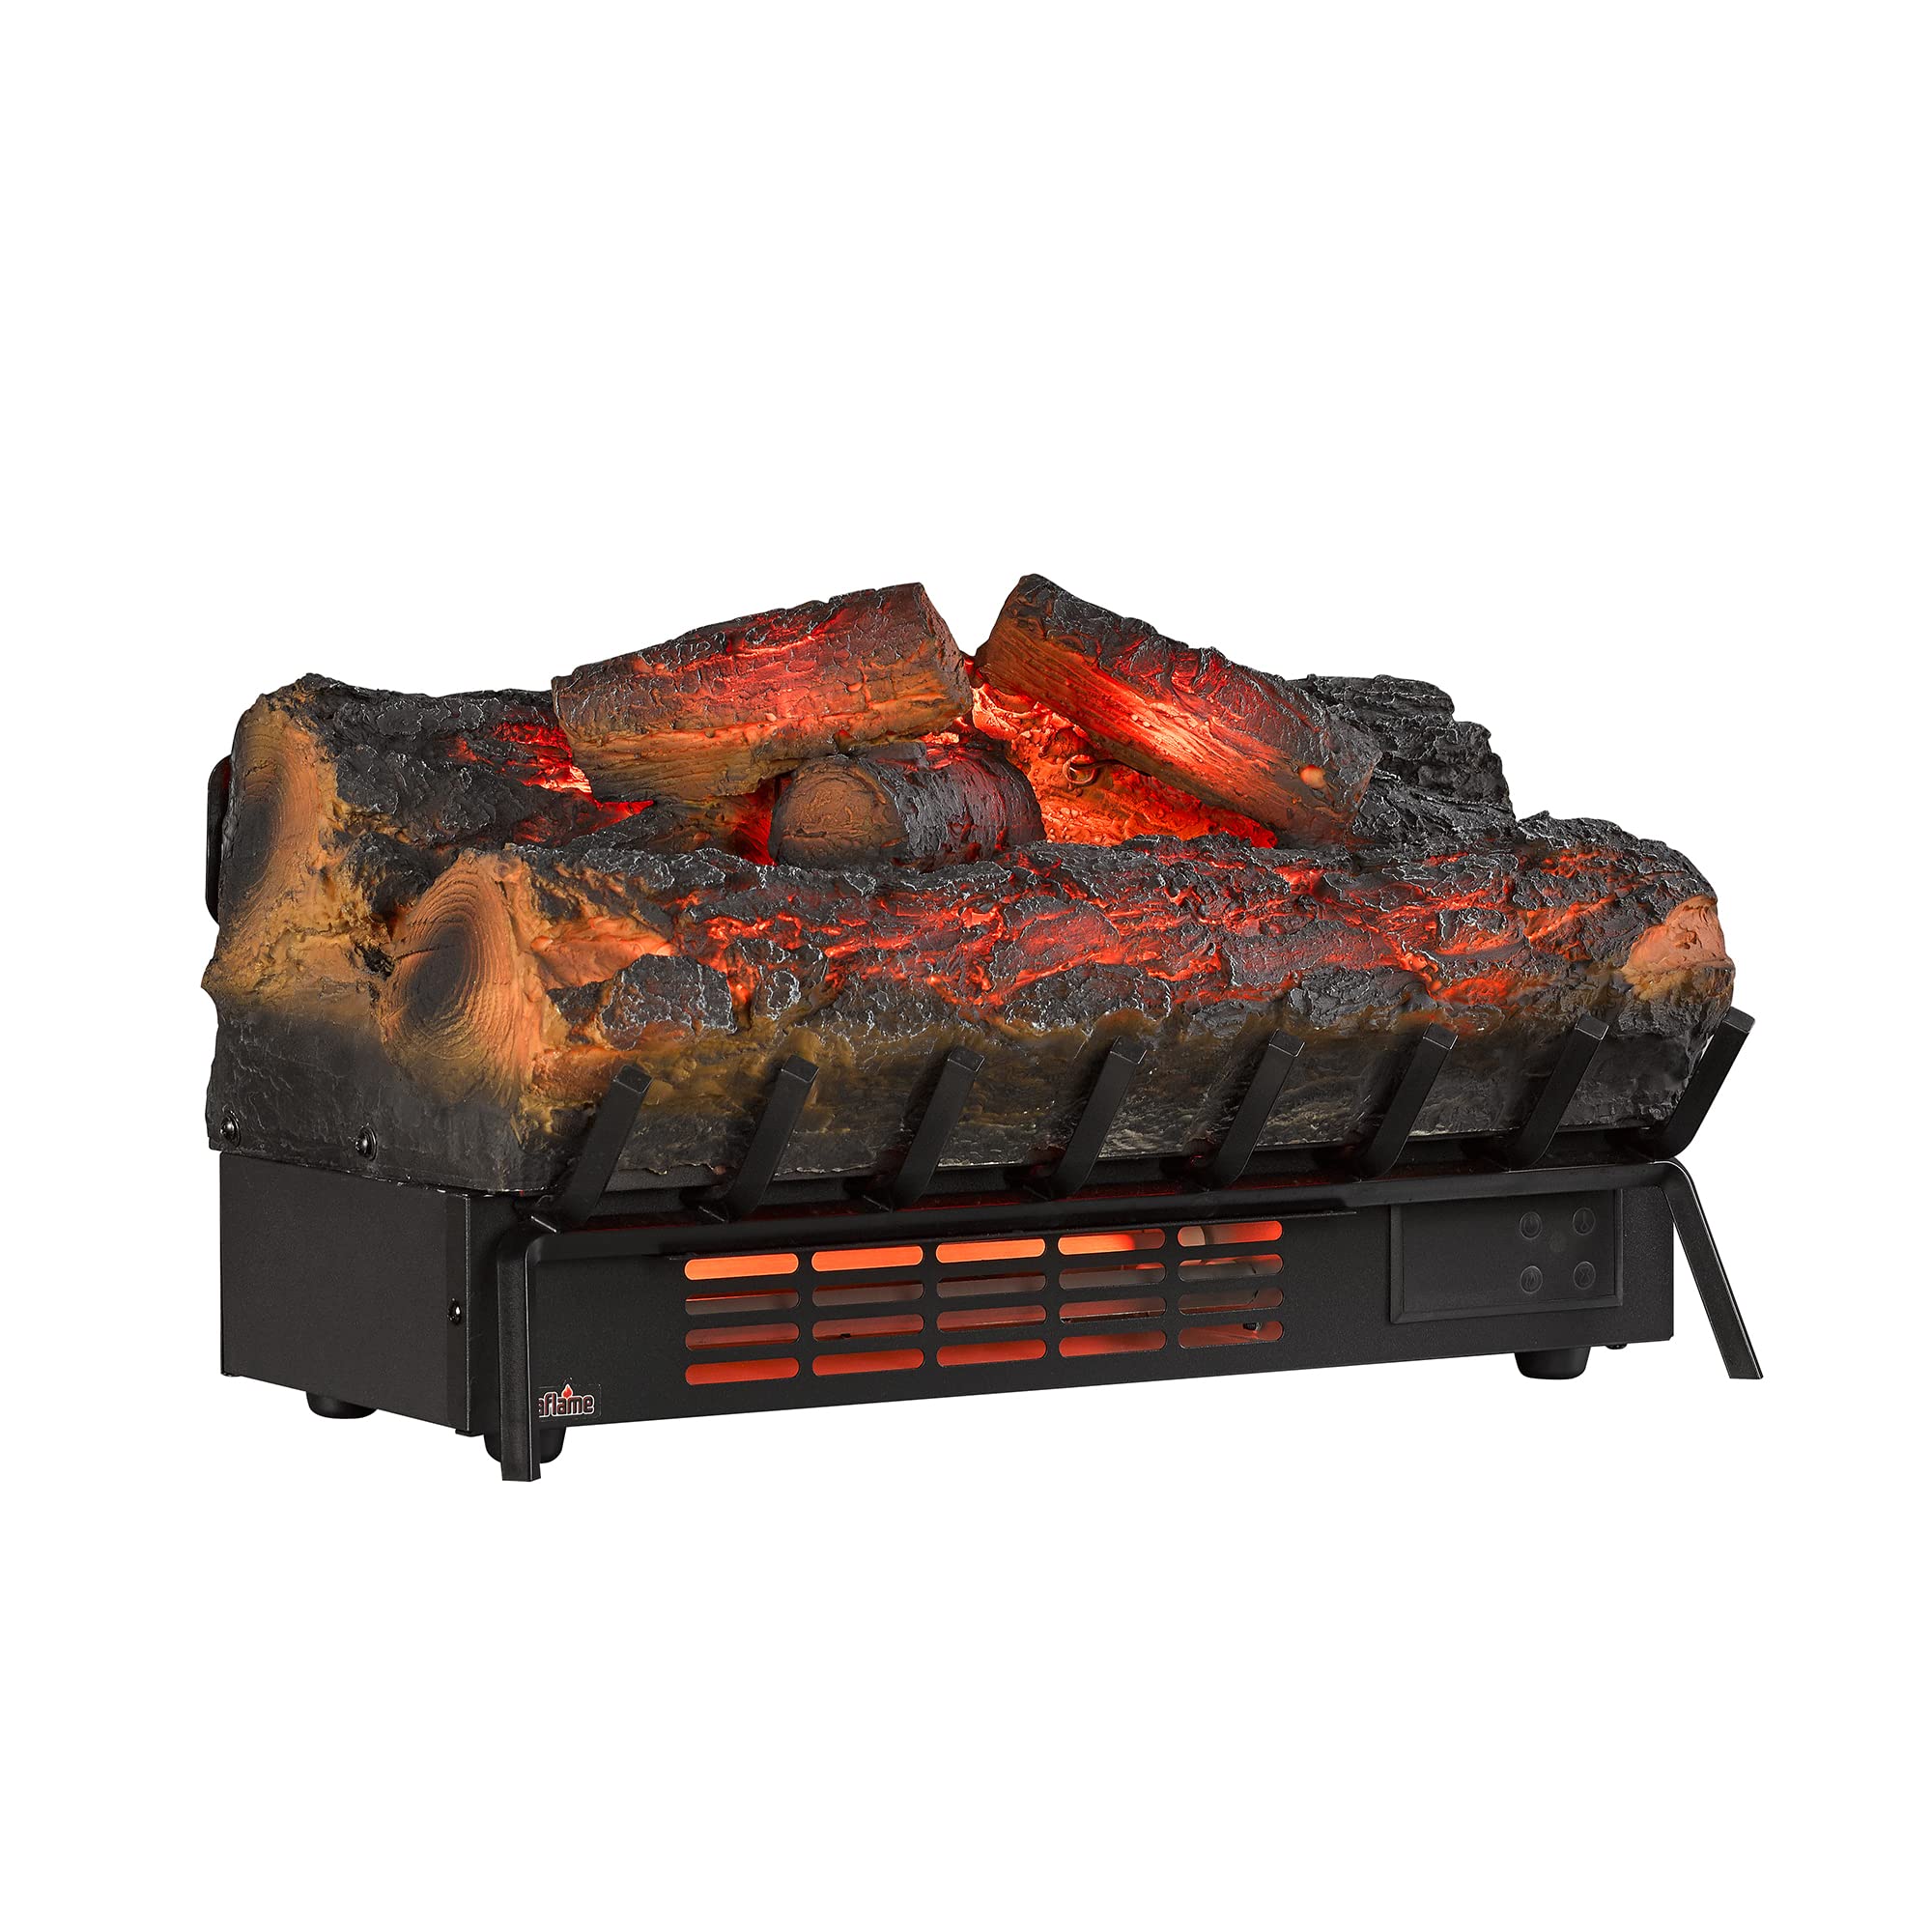 duraflame® Infrared Quartz Electric Log Set Heater with 3D Flame® Effect and Remote Control, Rustic Pine